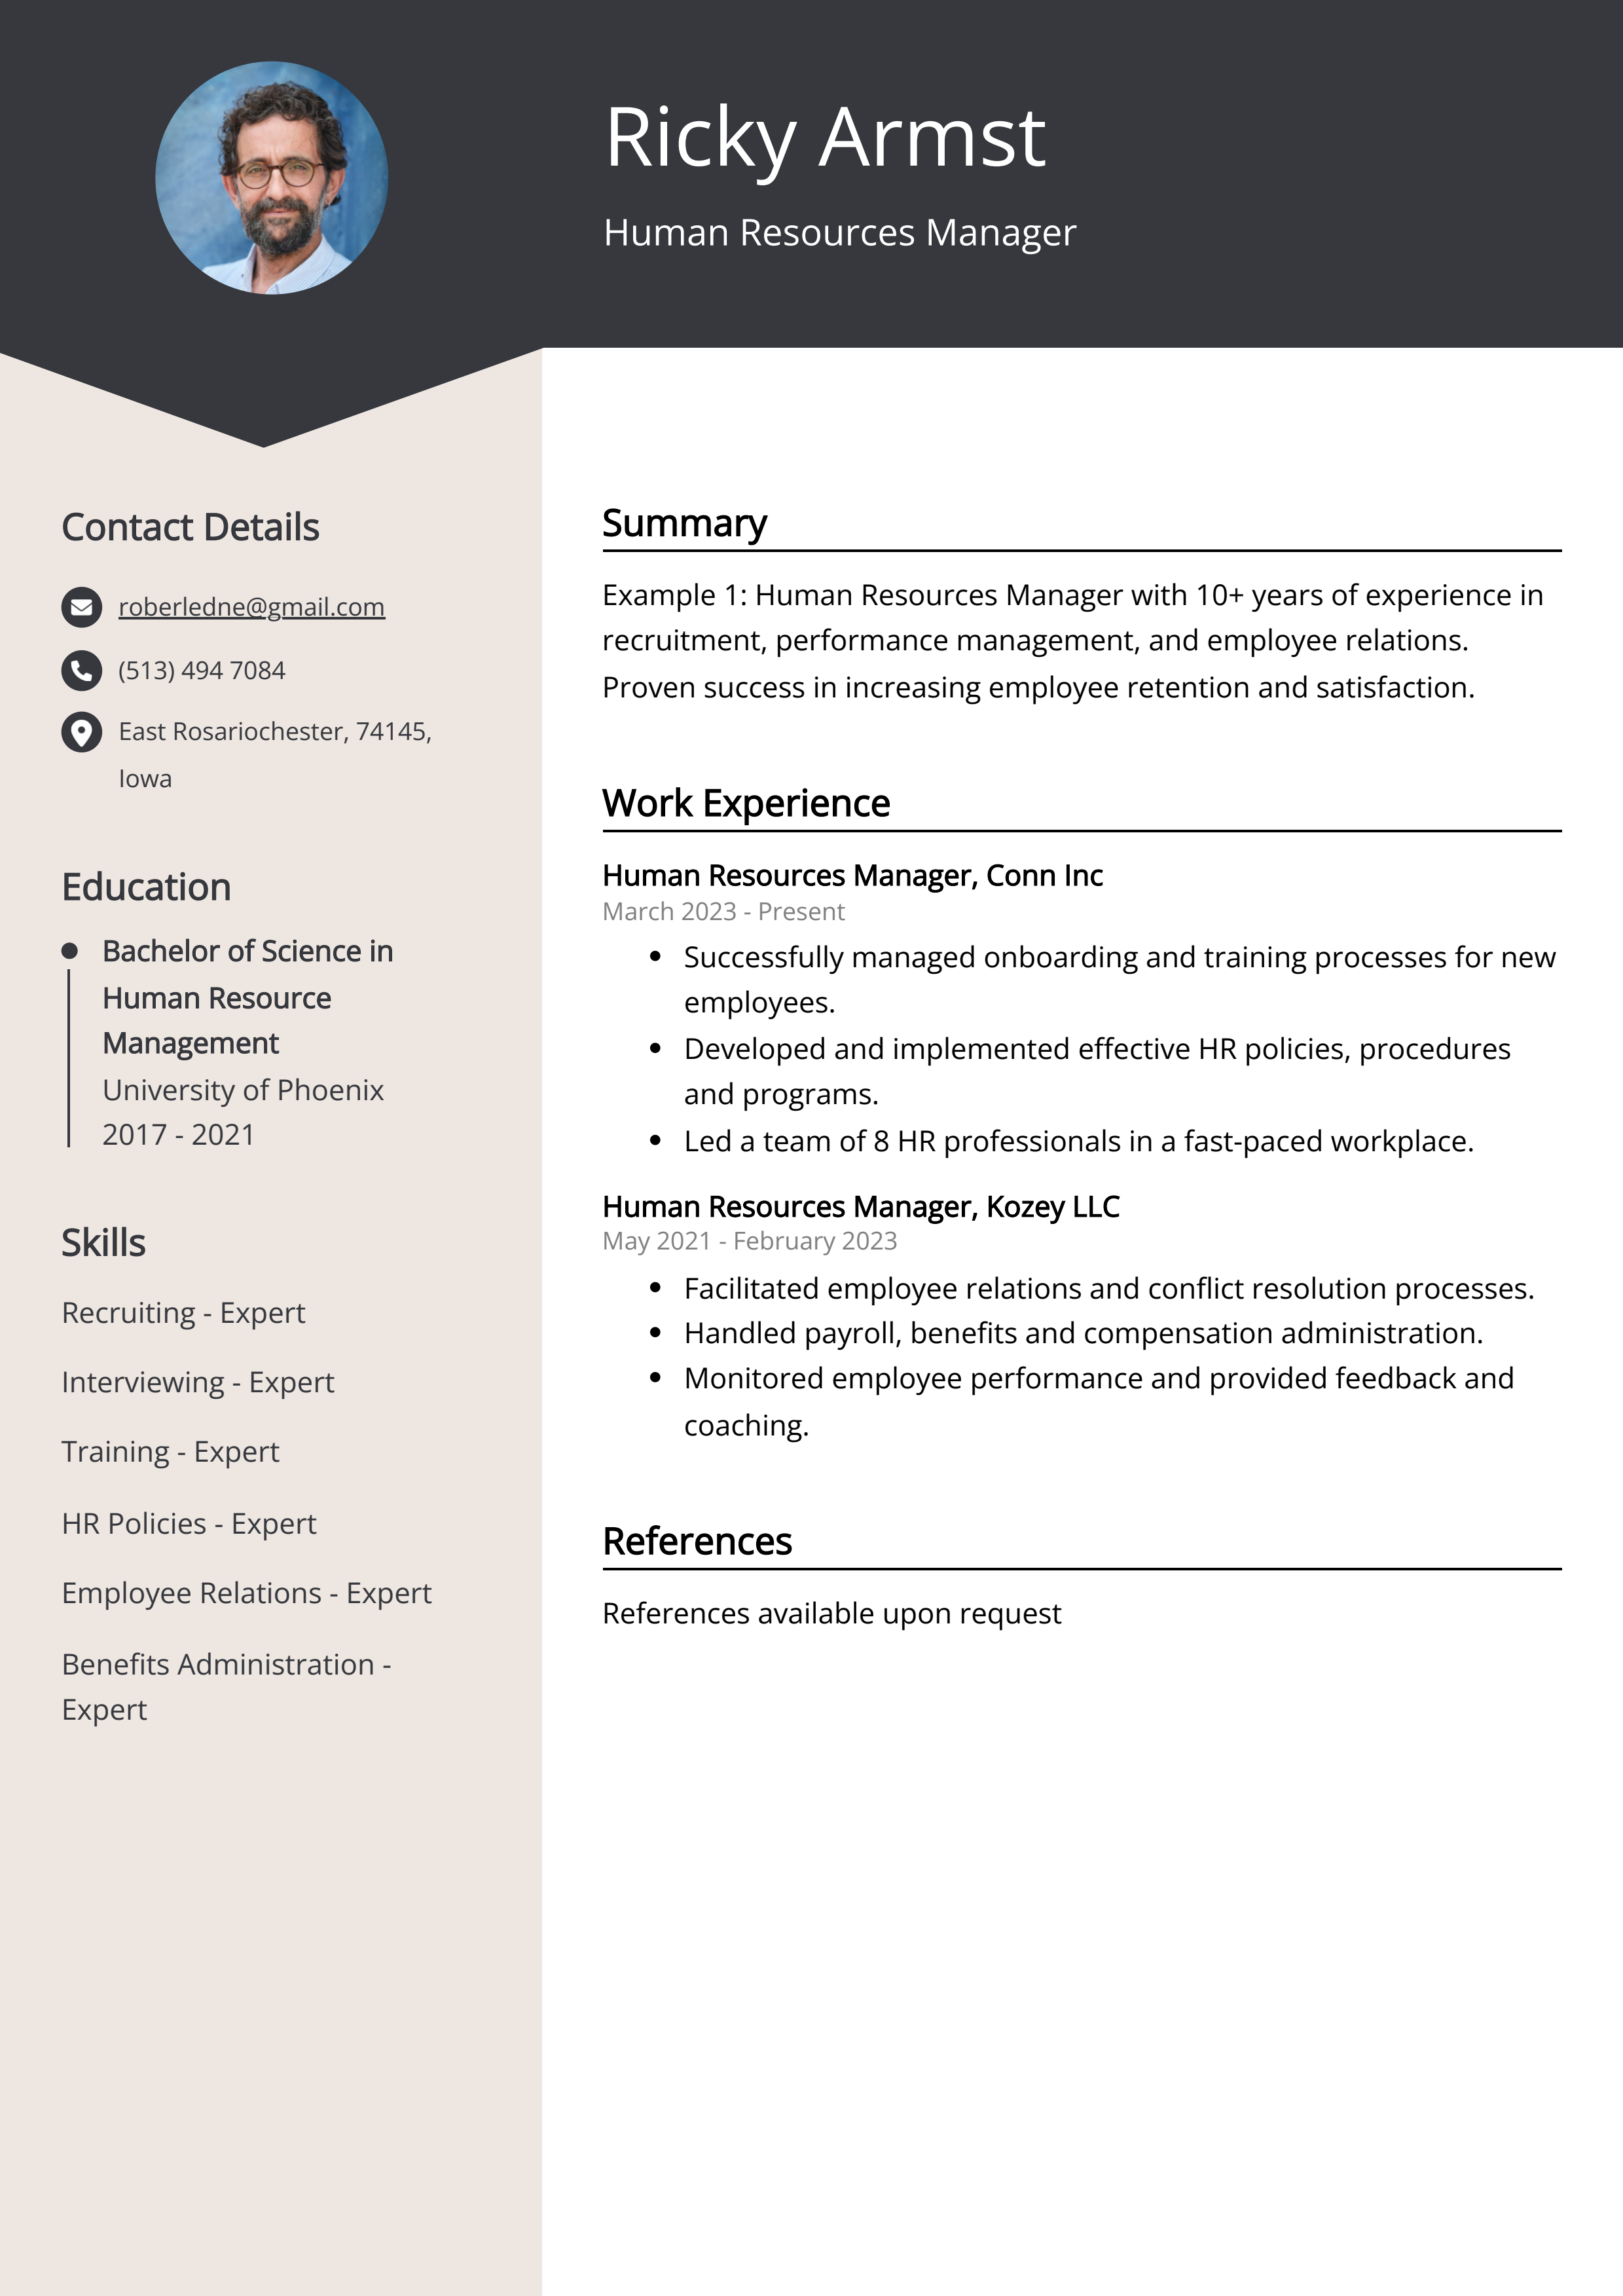 Human Resources Manager Resume Example